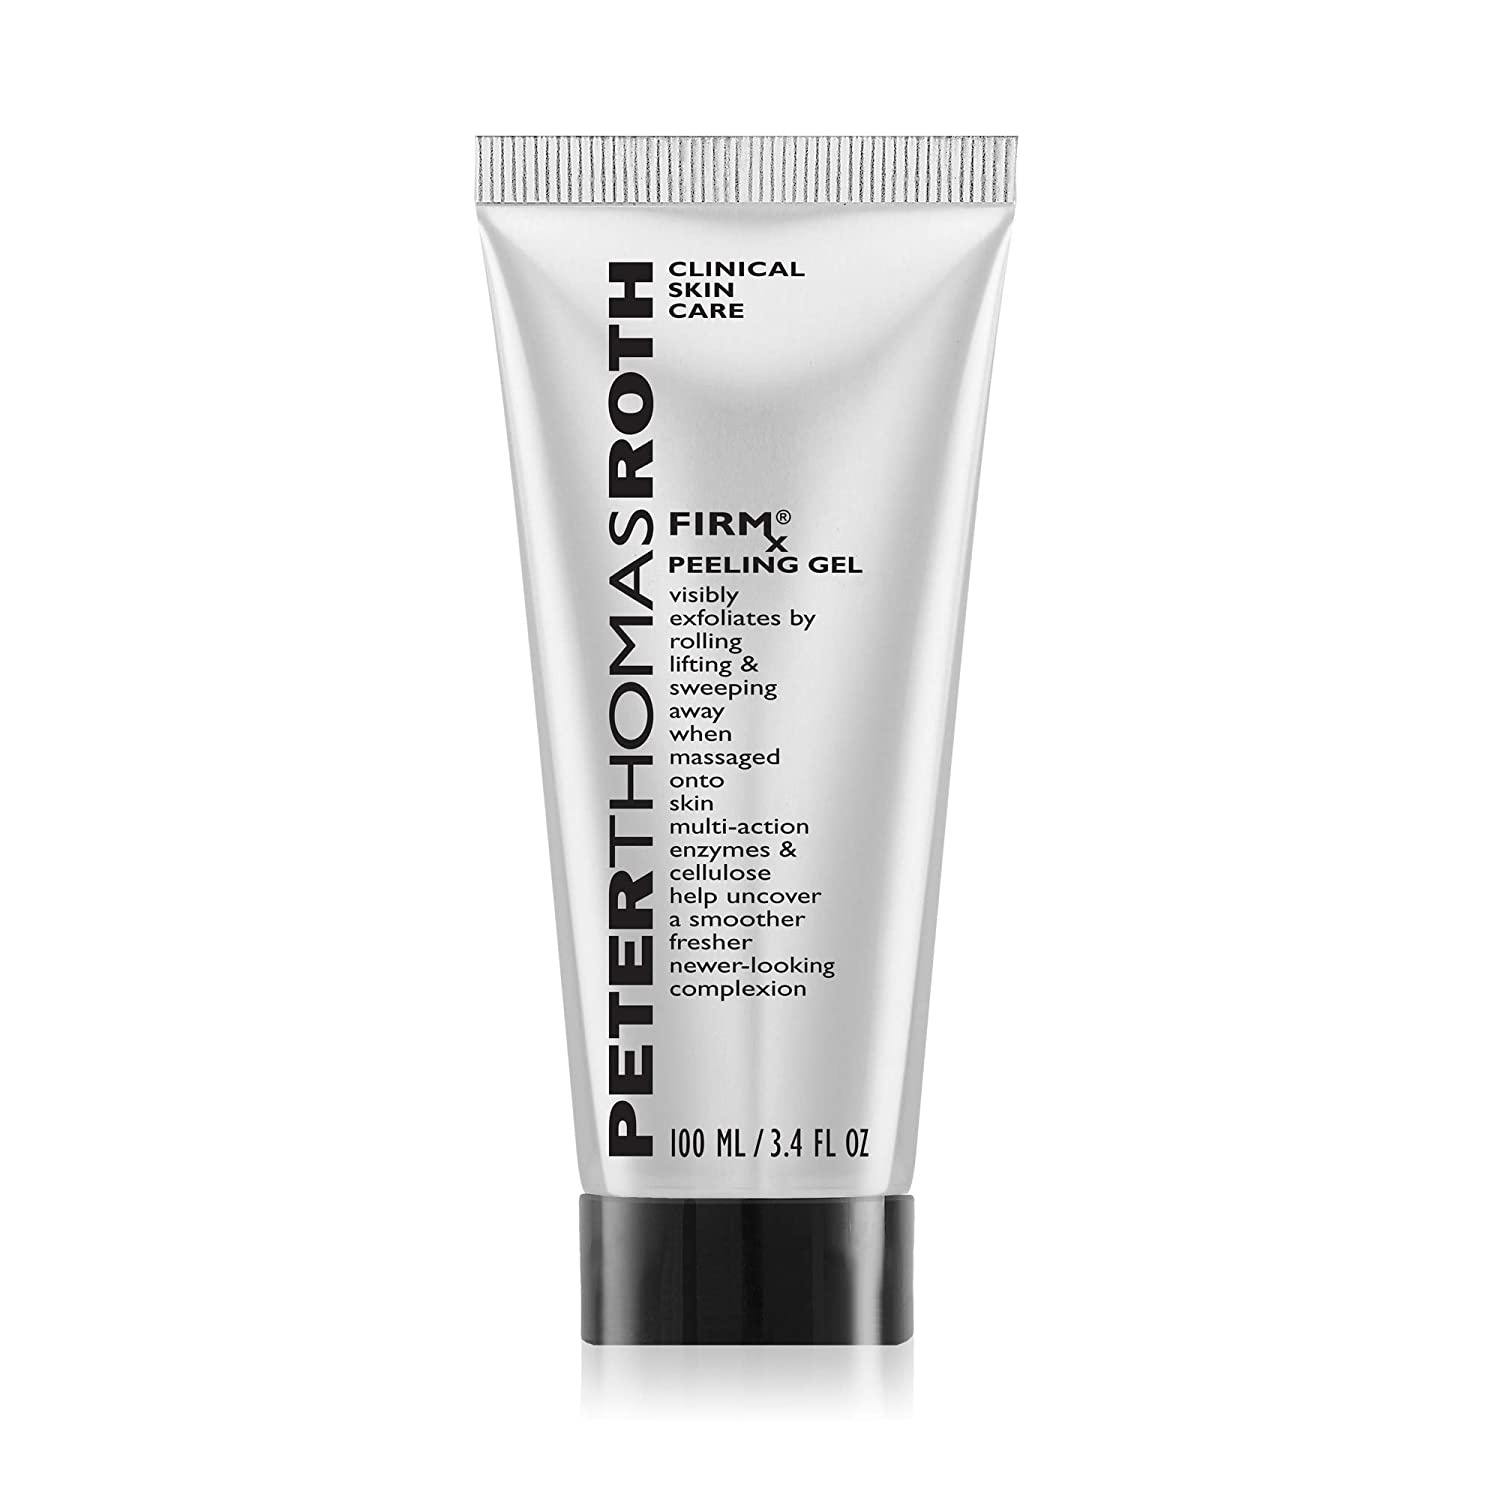 Peter Thomas Roth FIRMx Peeling Gel, Exfoliant for Dry and Flaky Skin.